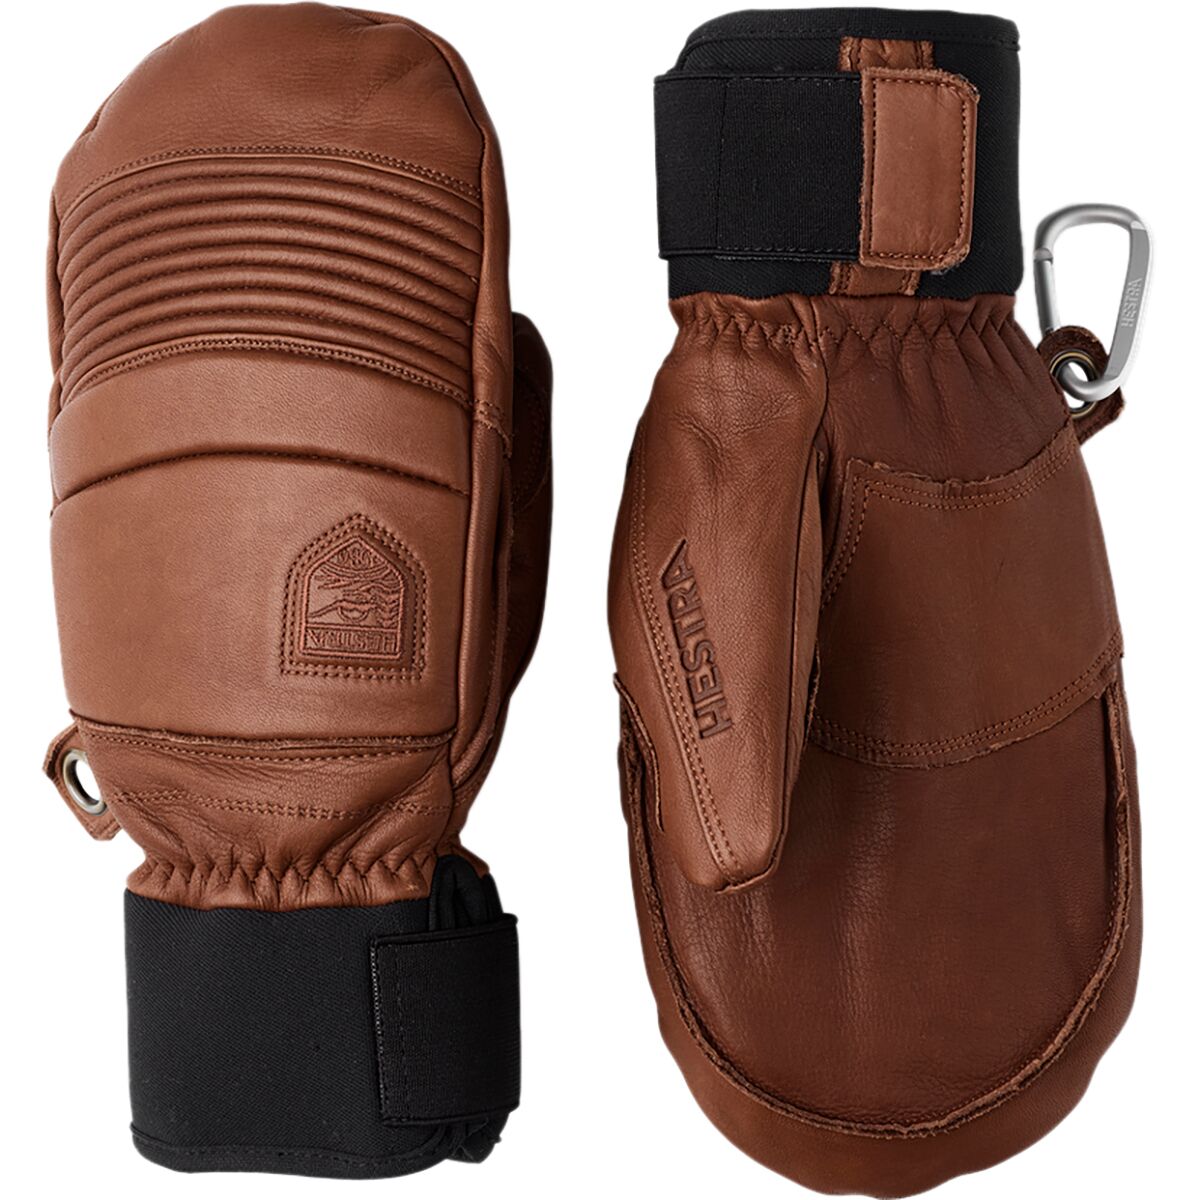 Hestra Leather Fall Line Mitten - Men's - Accessories